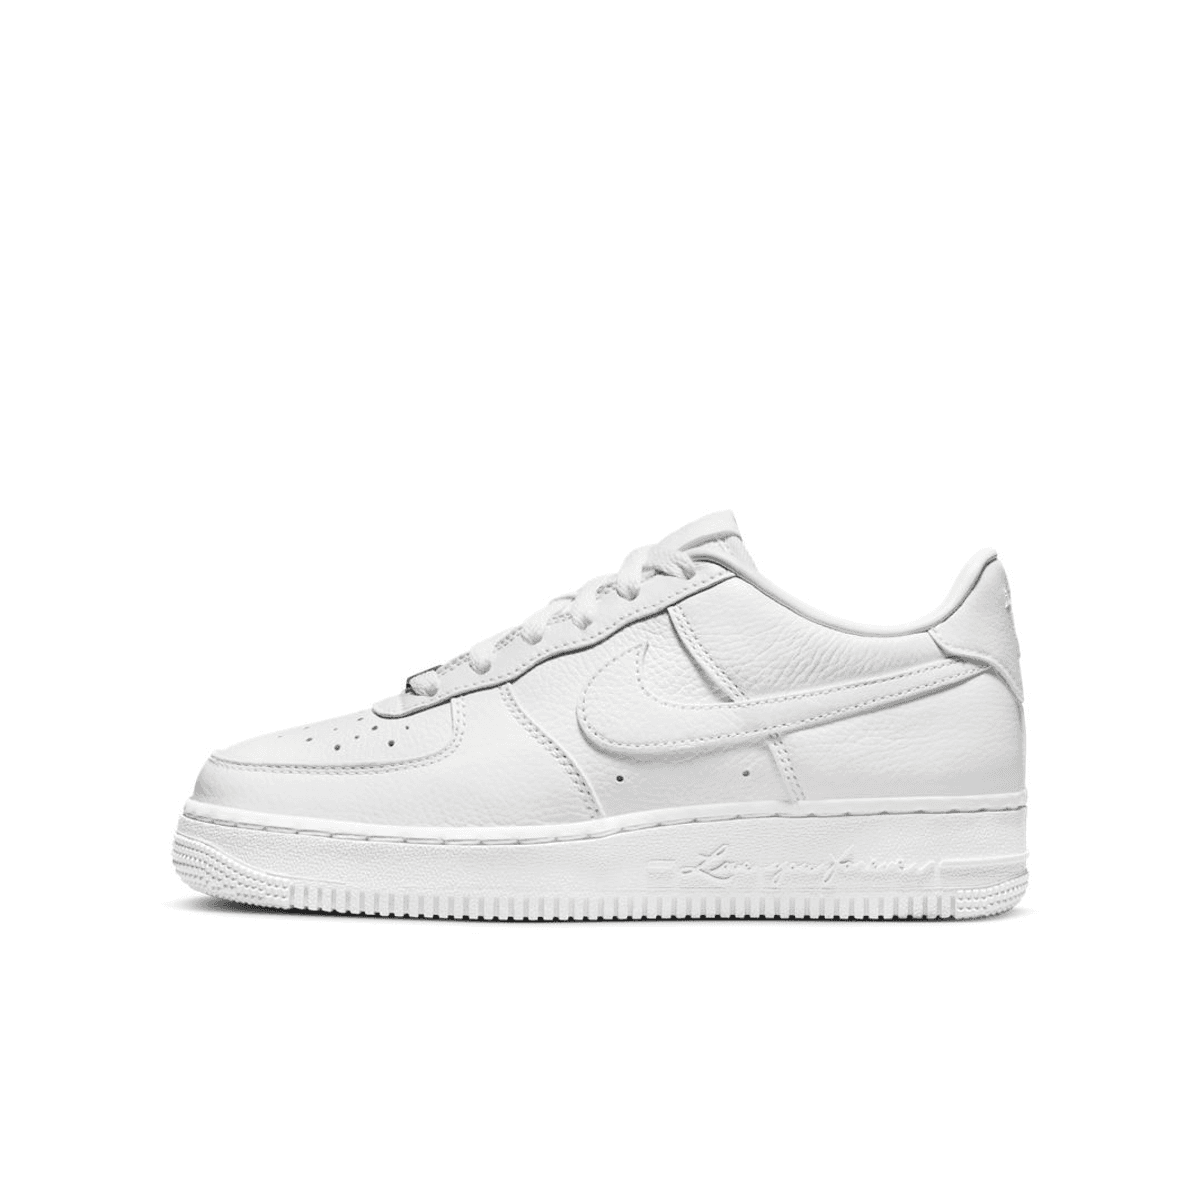 The NOCTA x Nike Air Force 1 Low "Love You Forever" Arrives In Grade School Sizing